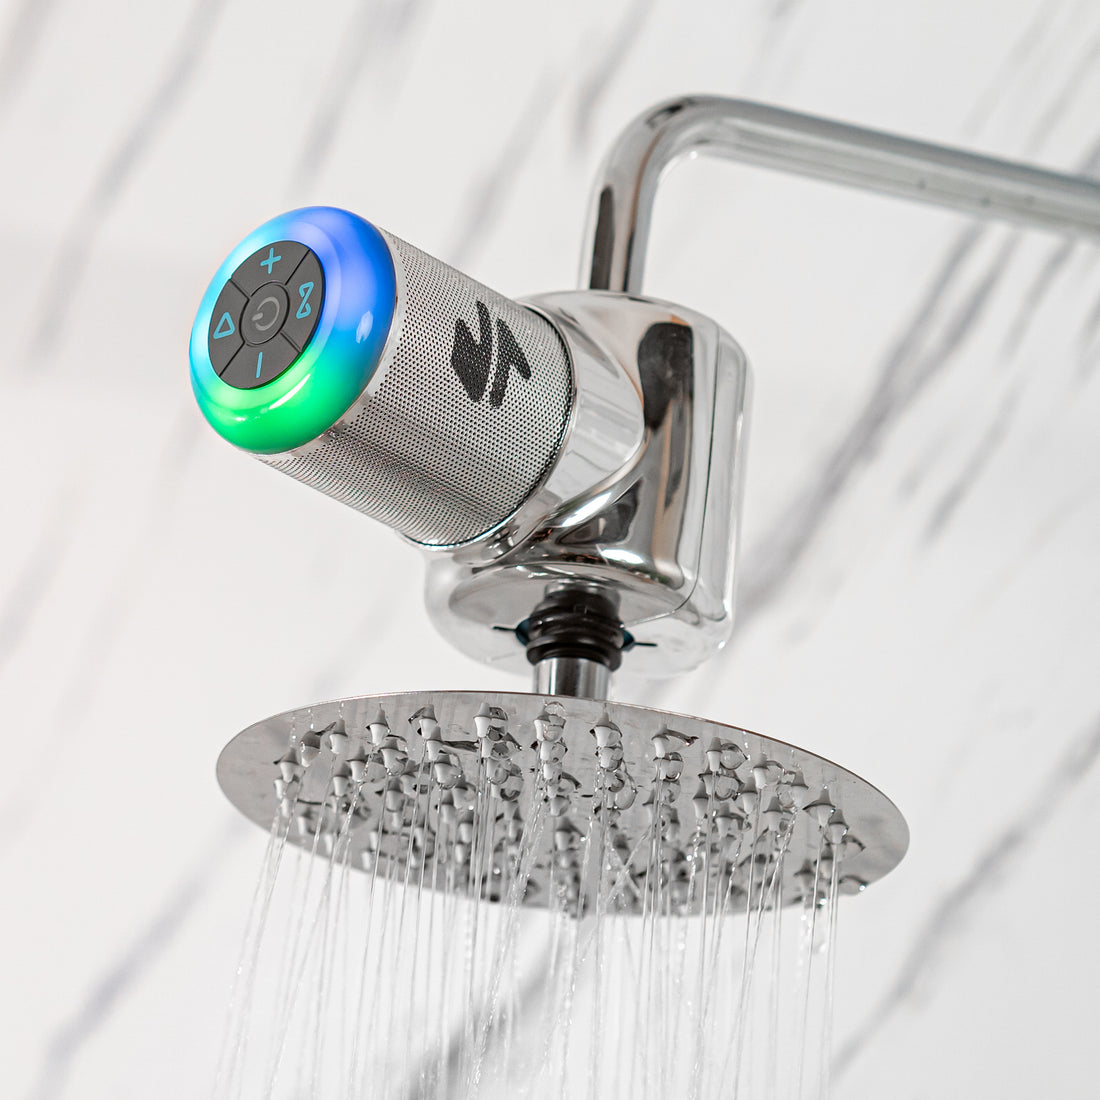 Shower Power Pro: The Hydropower Shower Speaker with LED Lights